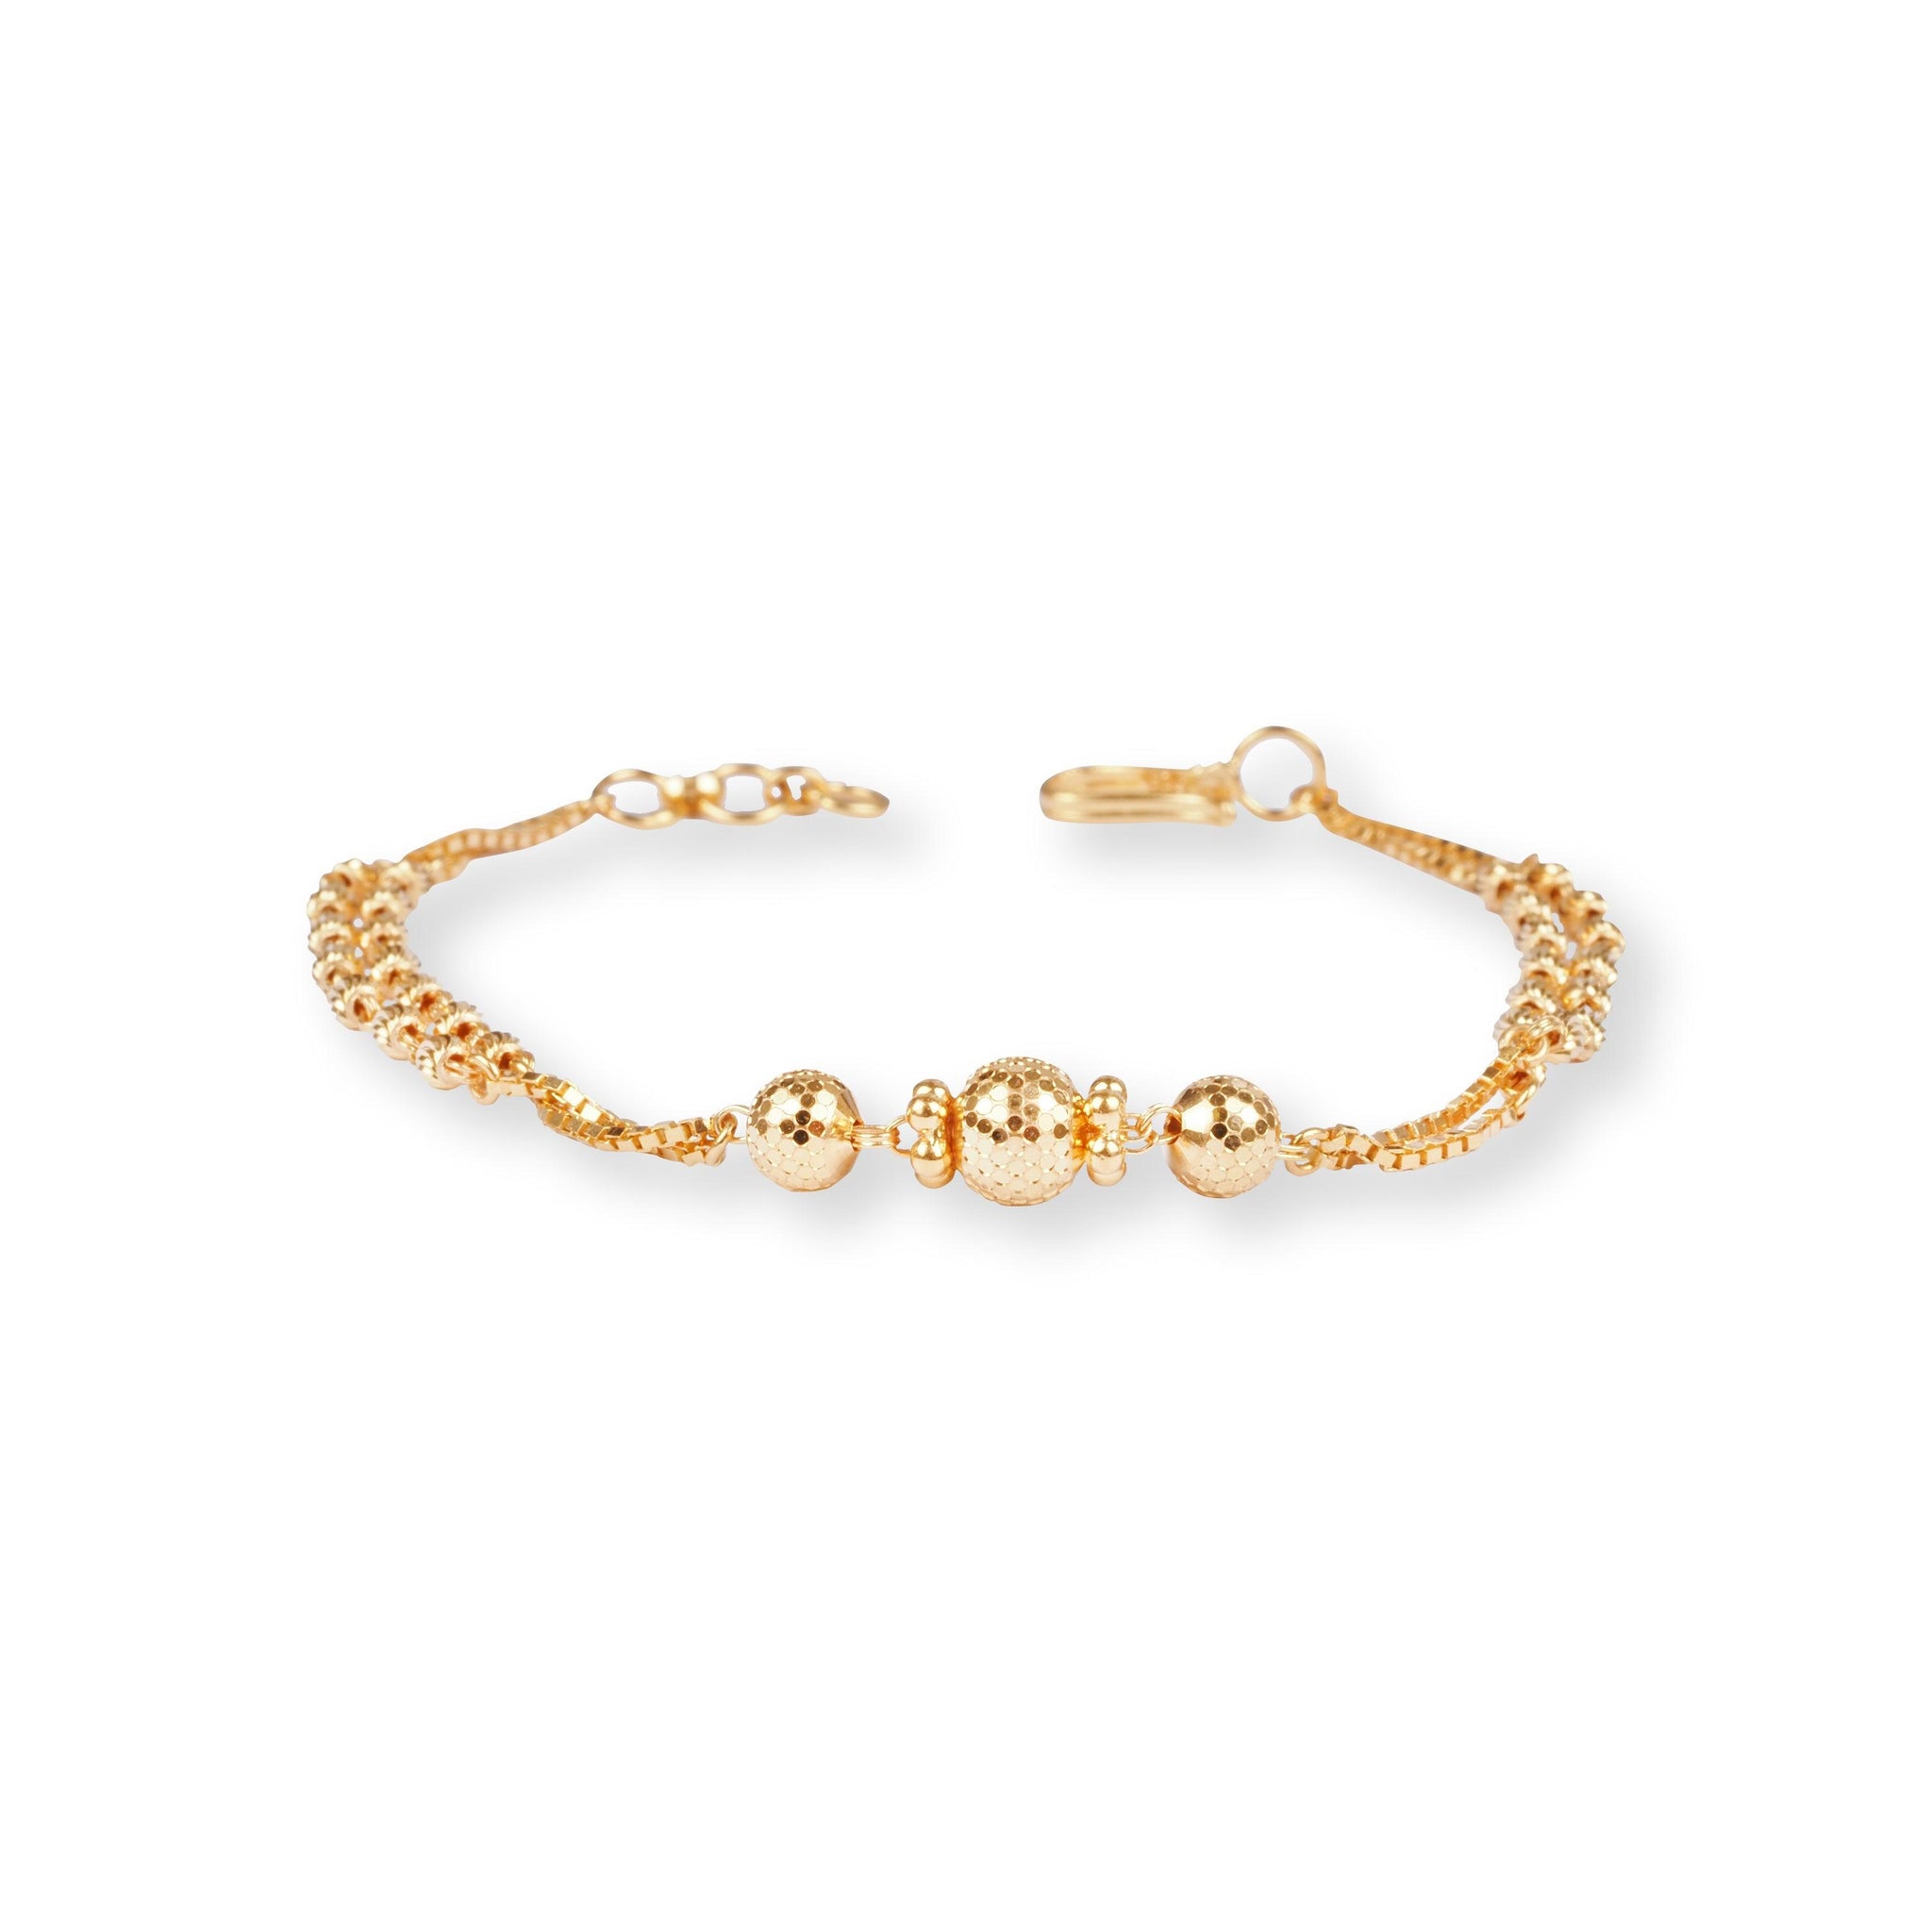 22ct Gold Bracelet with Diamond Cut Beads, Double Chain and Hook Clasp LBR-8500